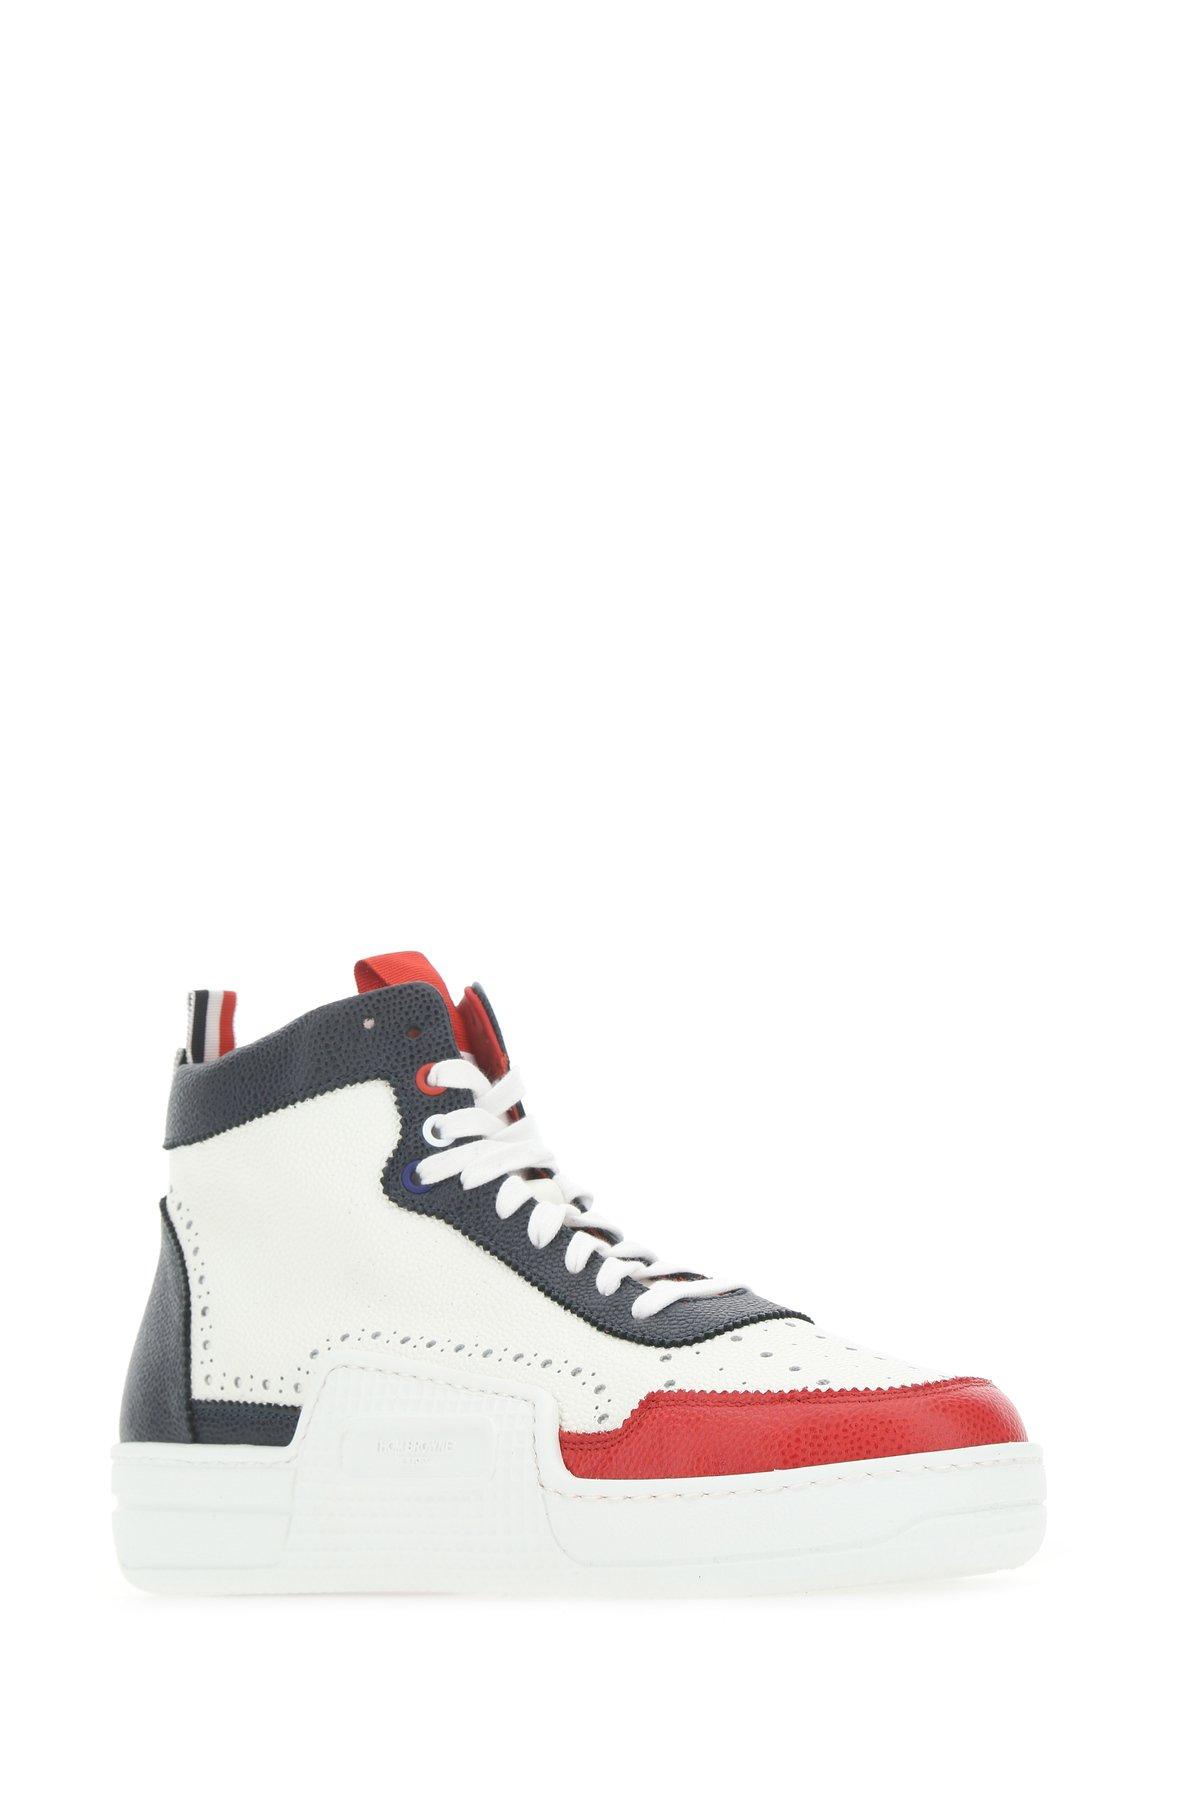 Thom Browne Leather High-top Basketball Sneakers for Men | Lyst